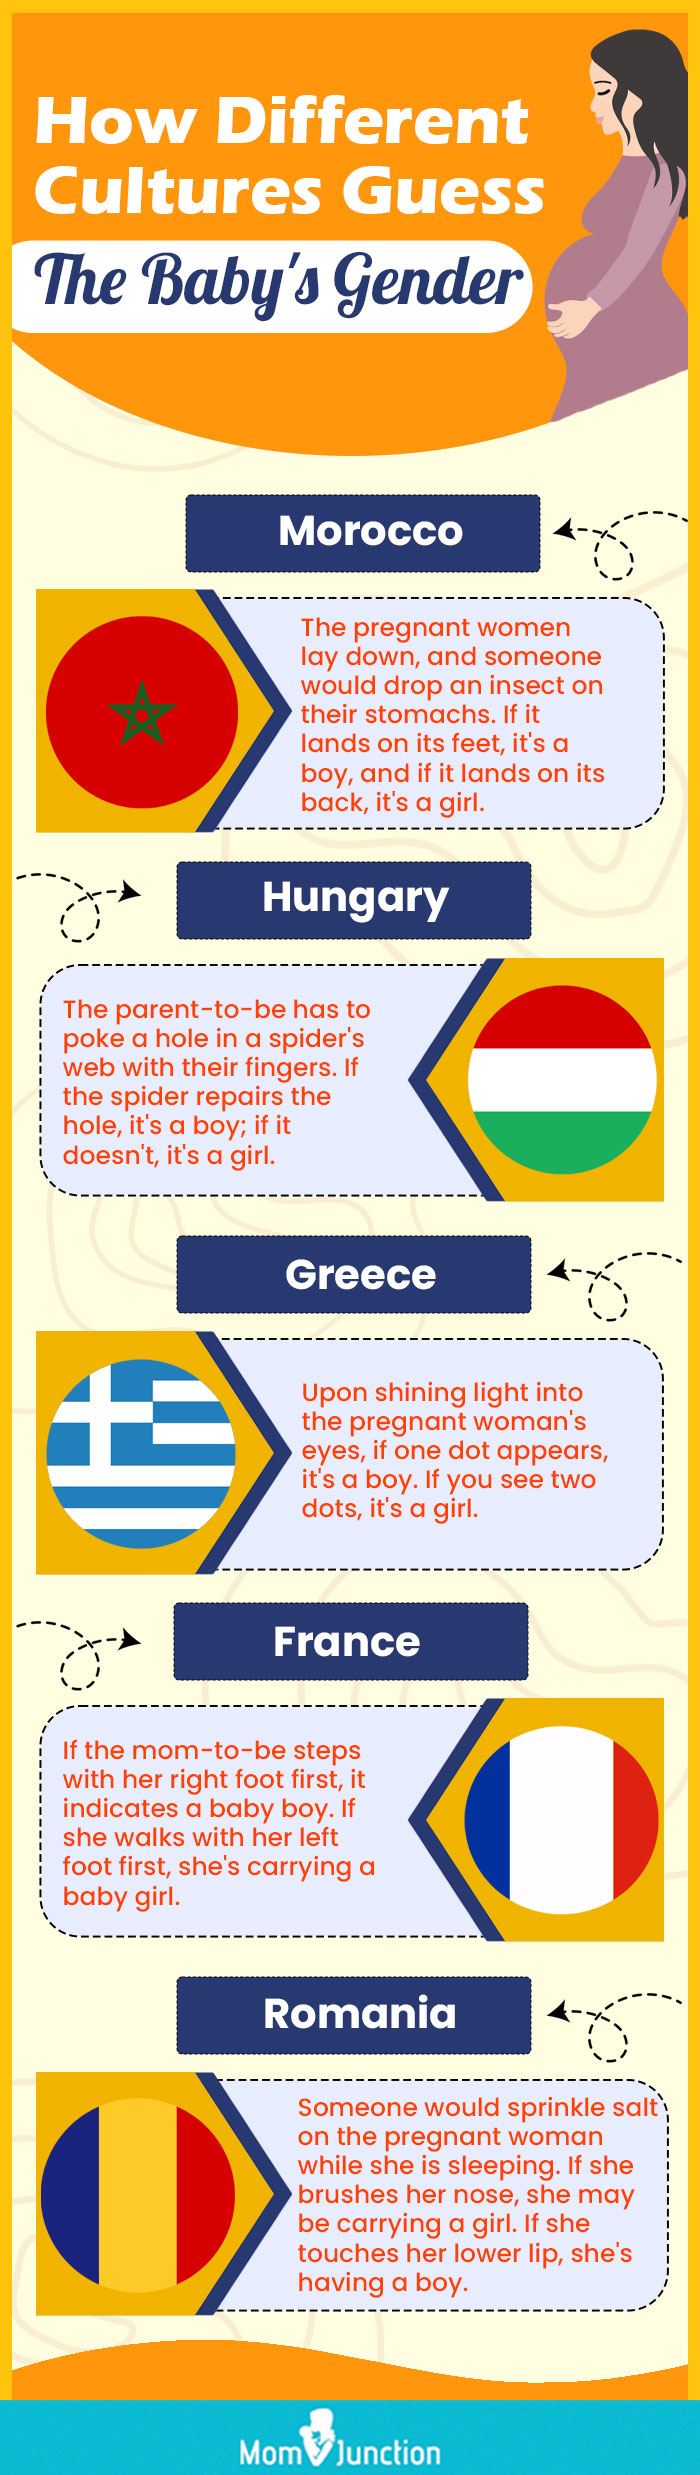 how different cultures guess the baby's gender (infographic)